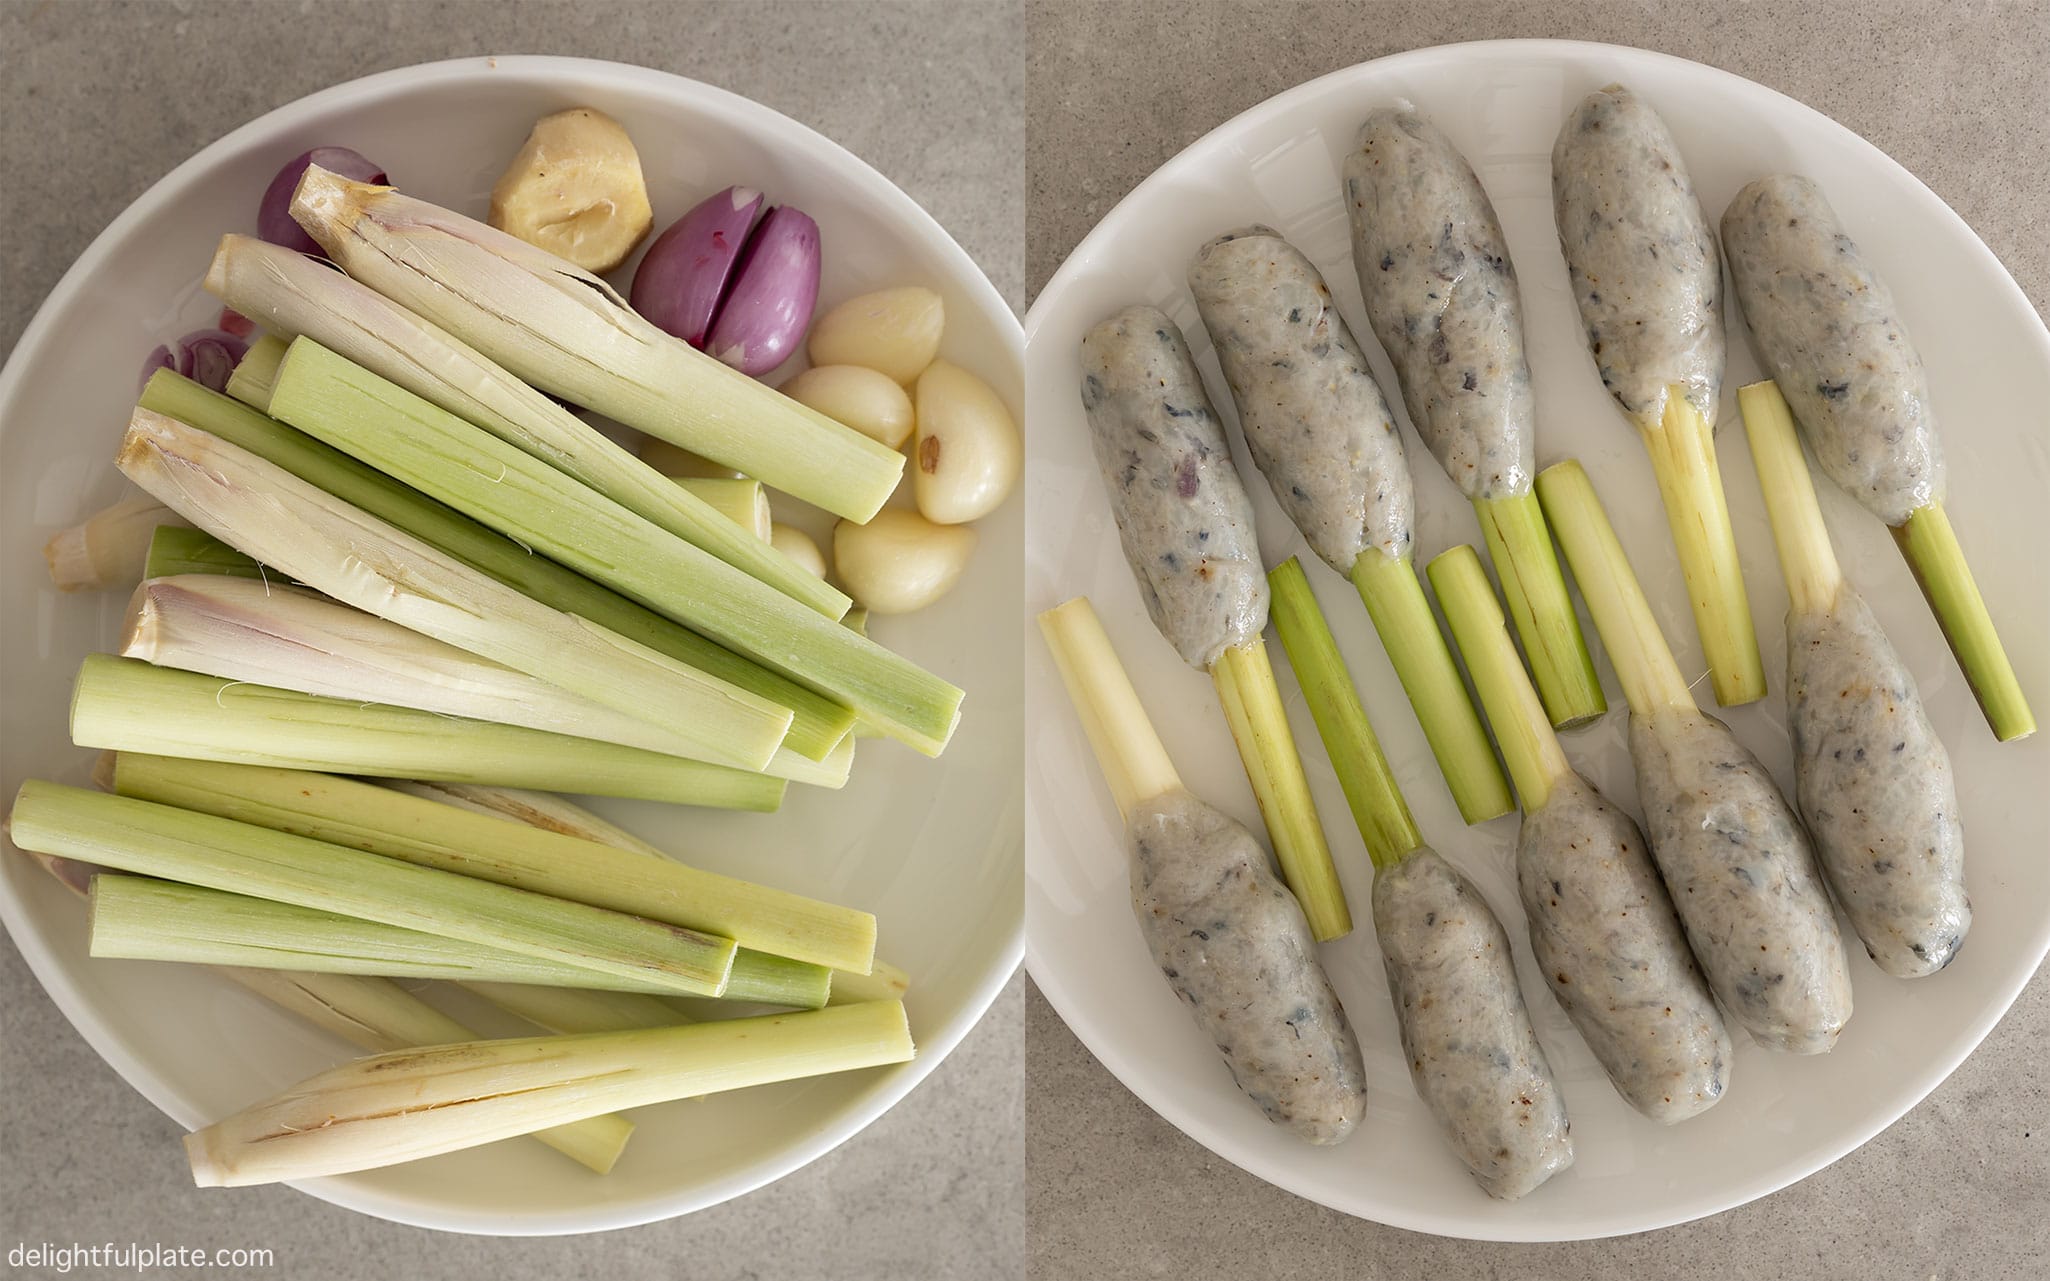 Lemongrass sticks before and after being wrapped with shrimp mousse